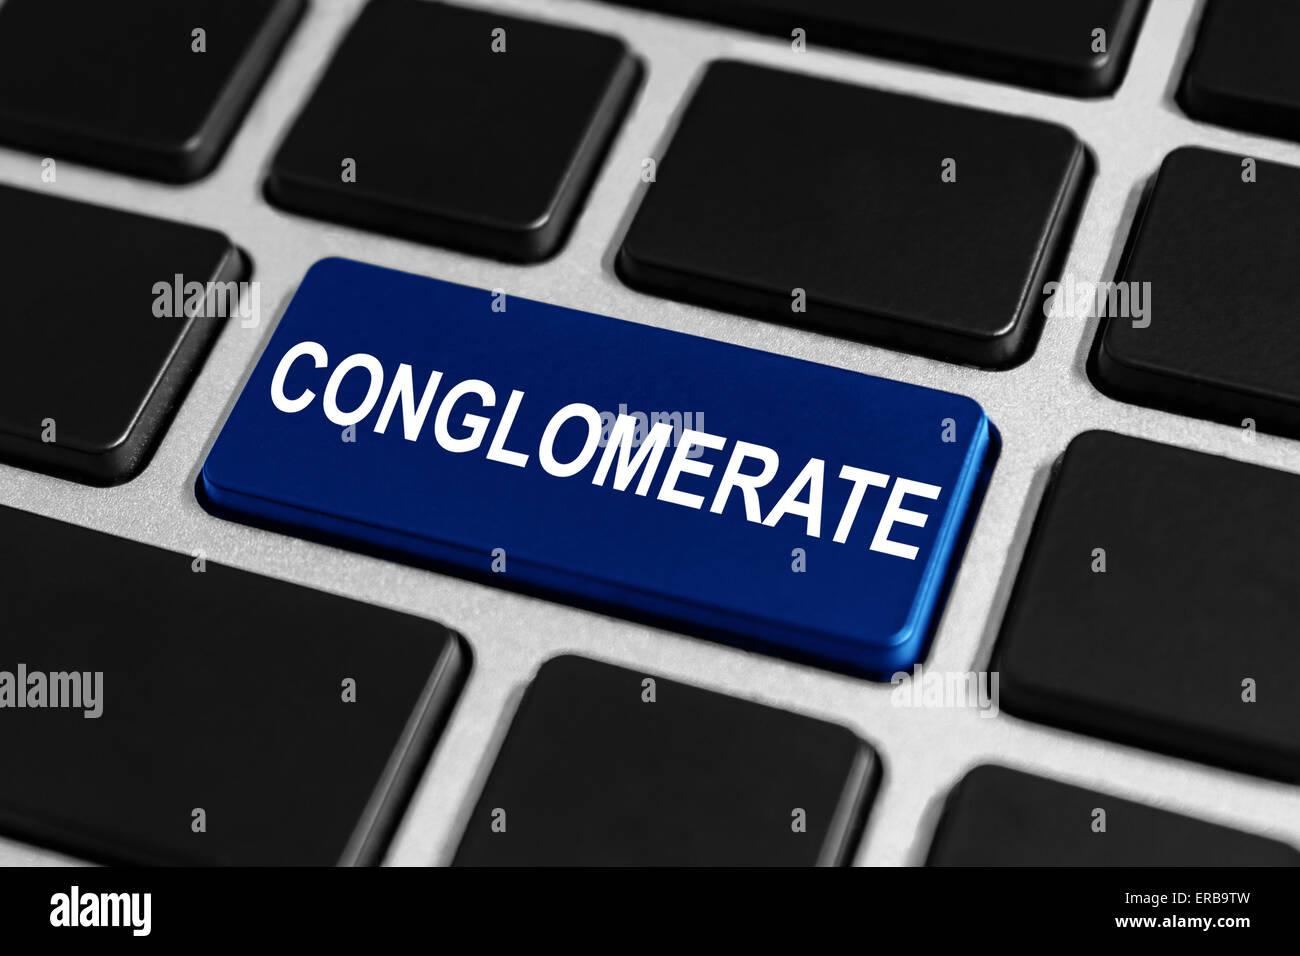 business conglomerate button on keyboard, business concept Stock Photo